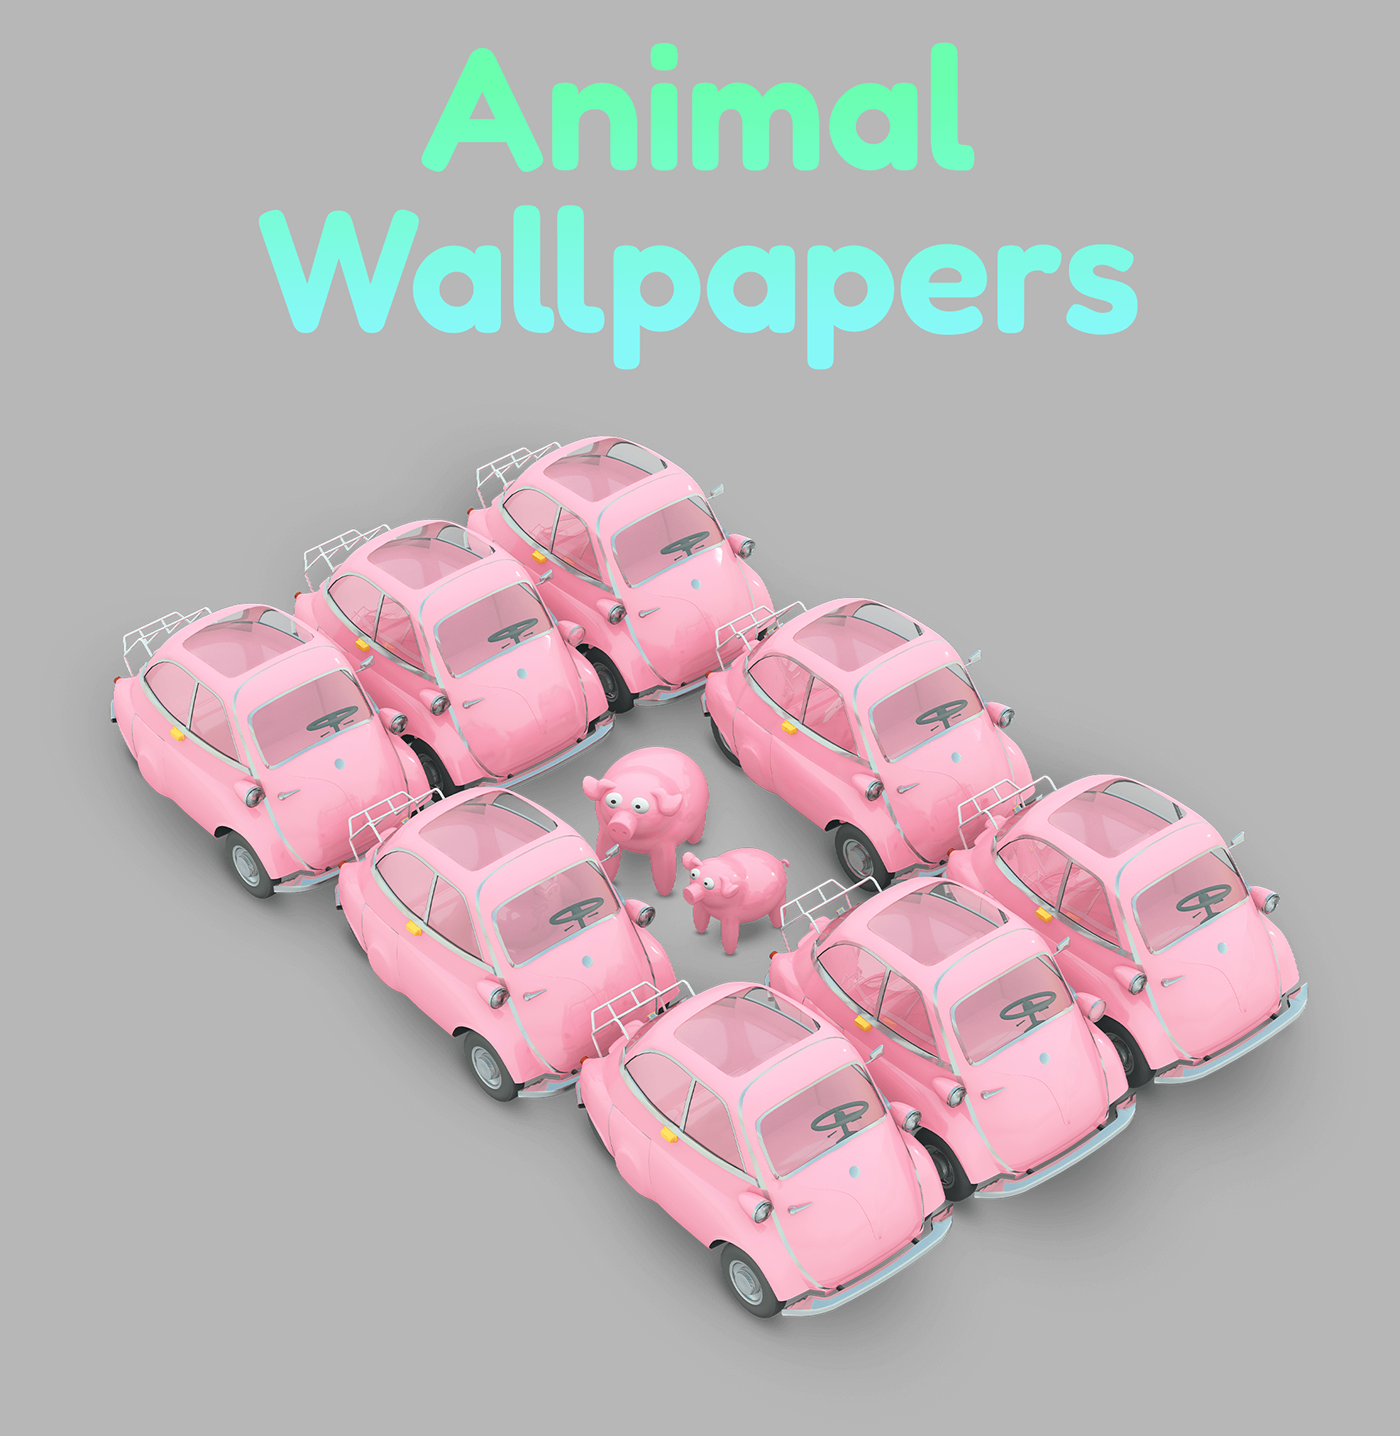 3dicons 3dmodeling 3dwallpapers icons set Wallpapers